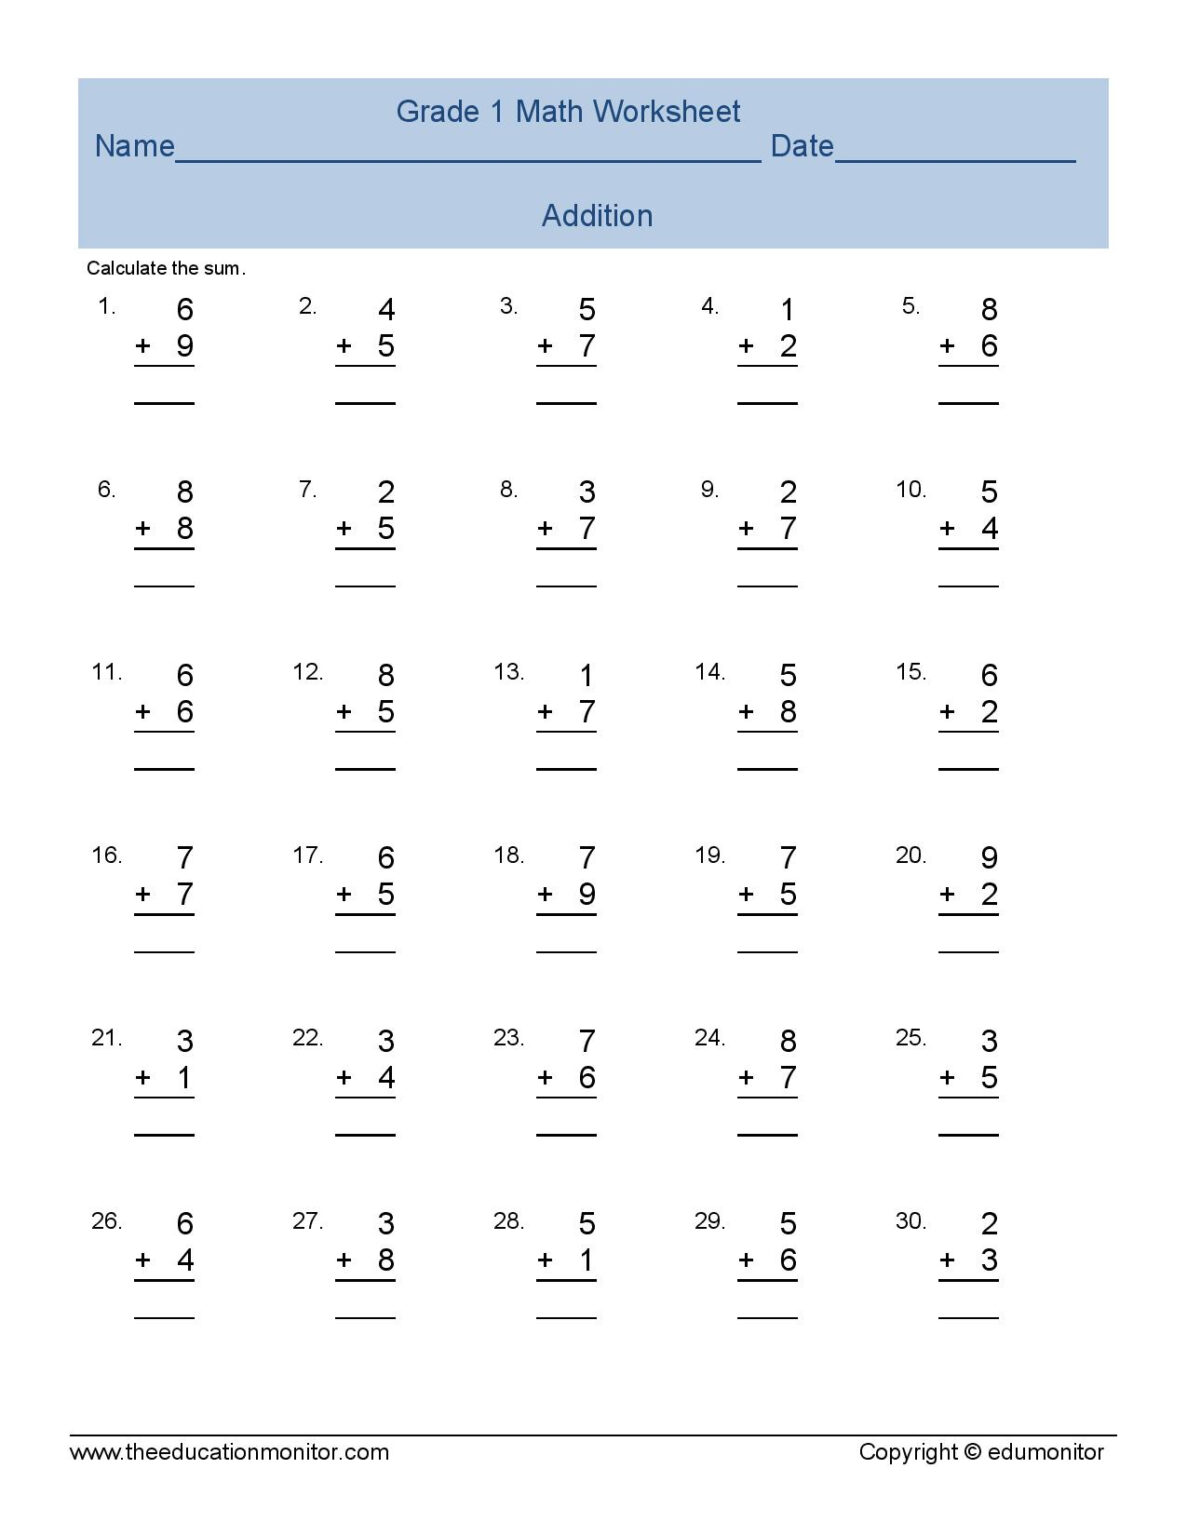 Free Printable Grade 1 Maths Worksheets South Africa